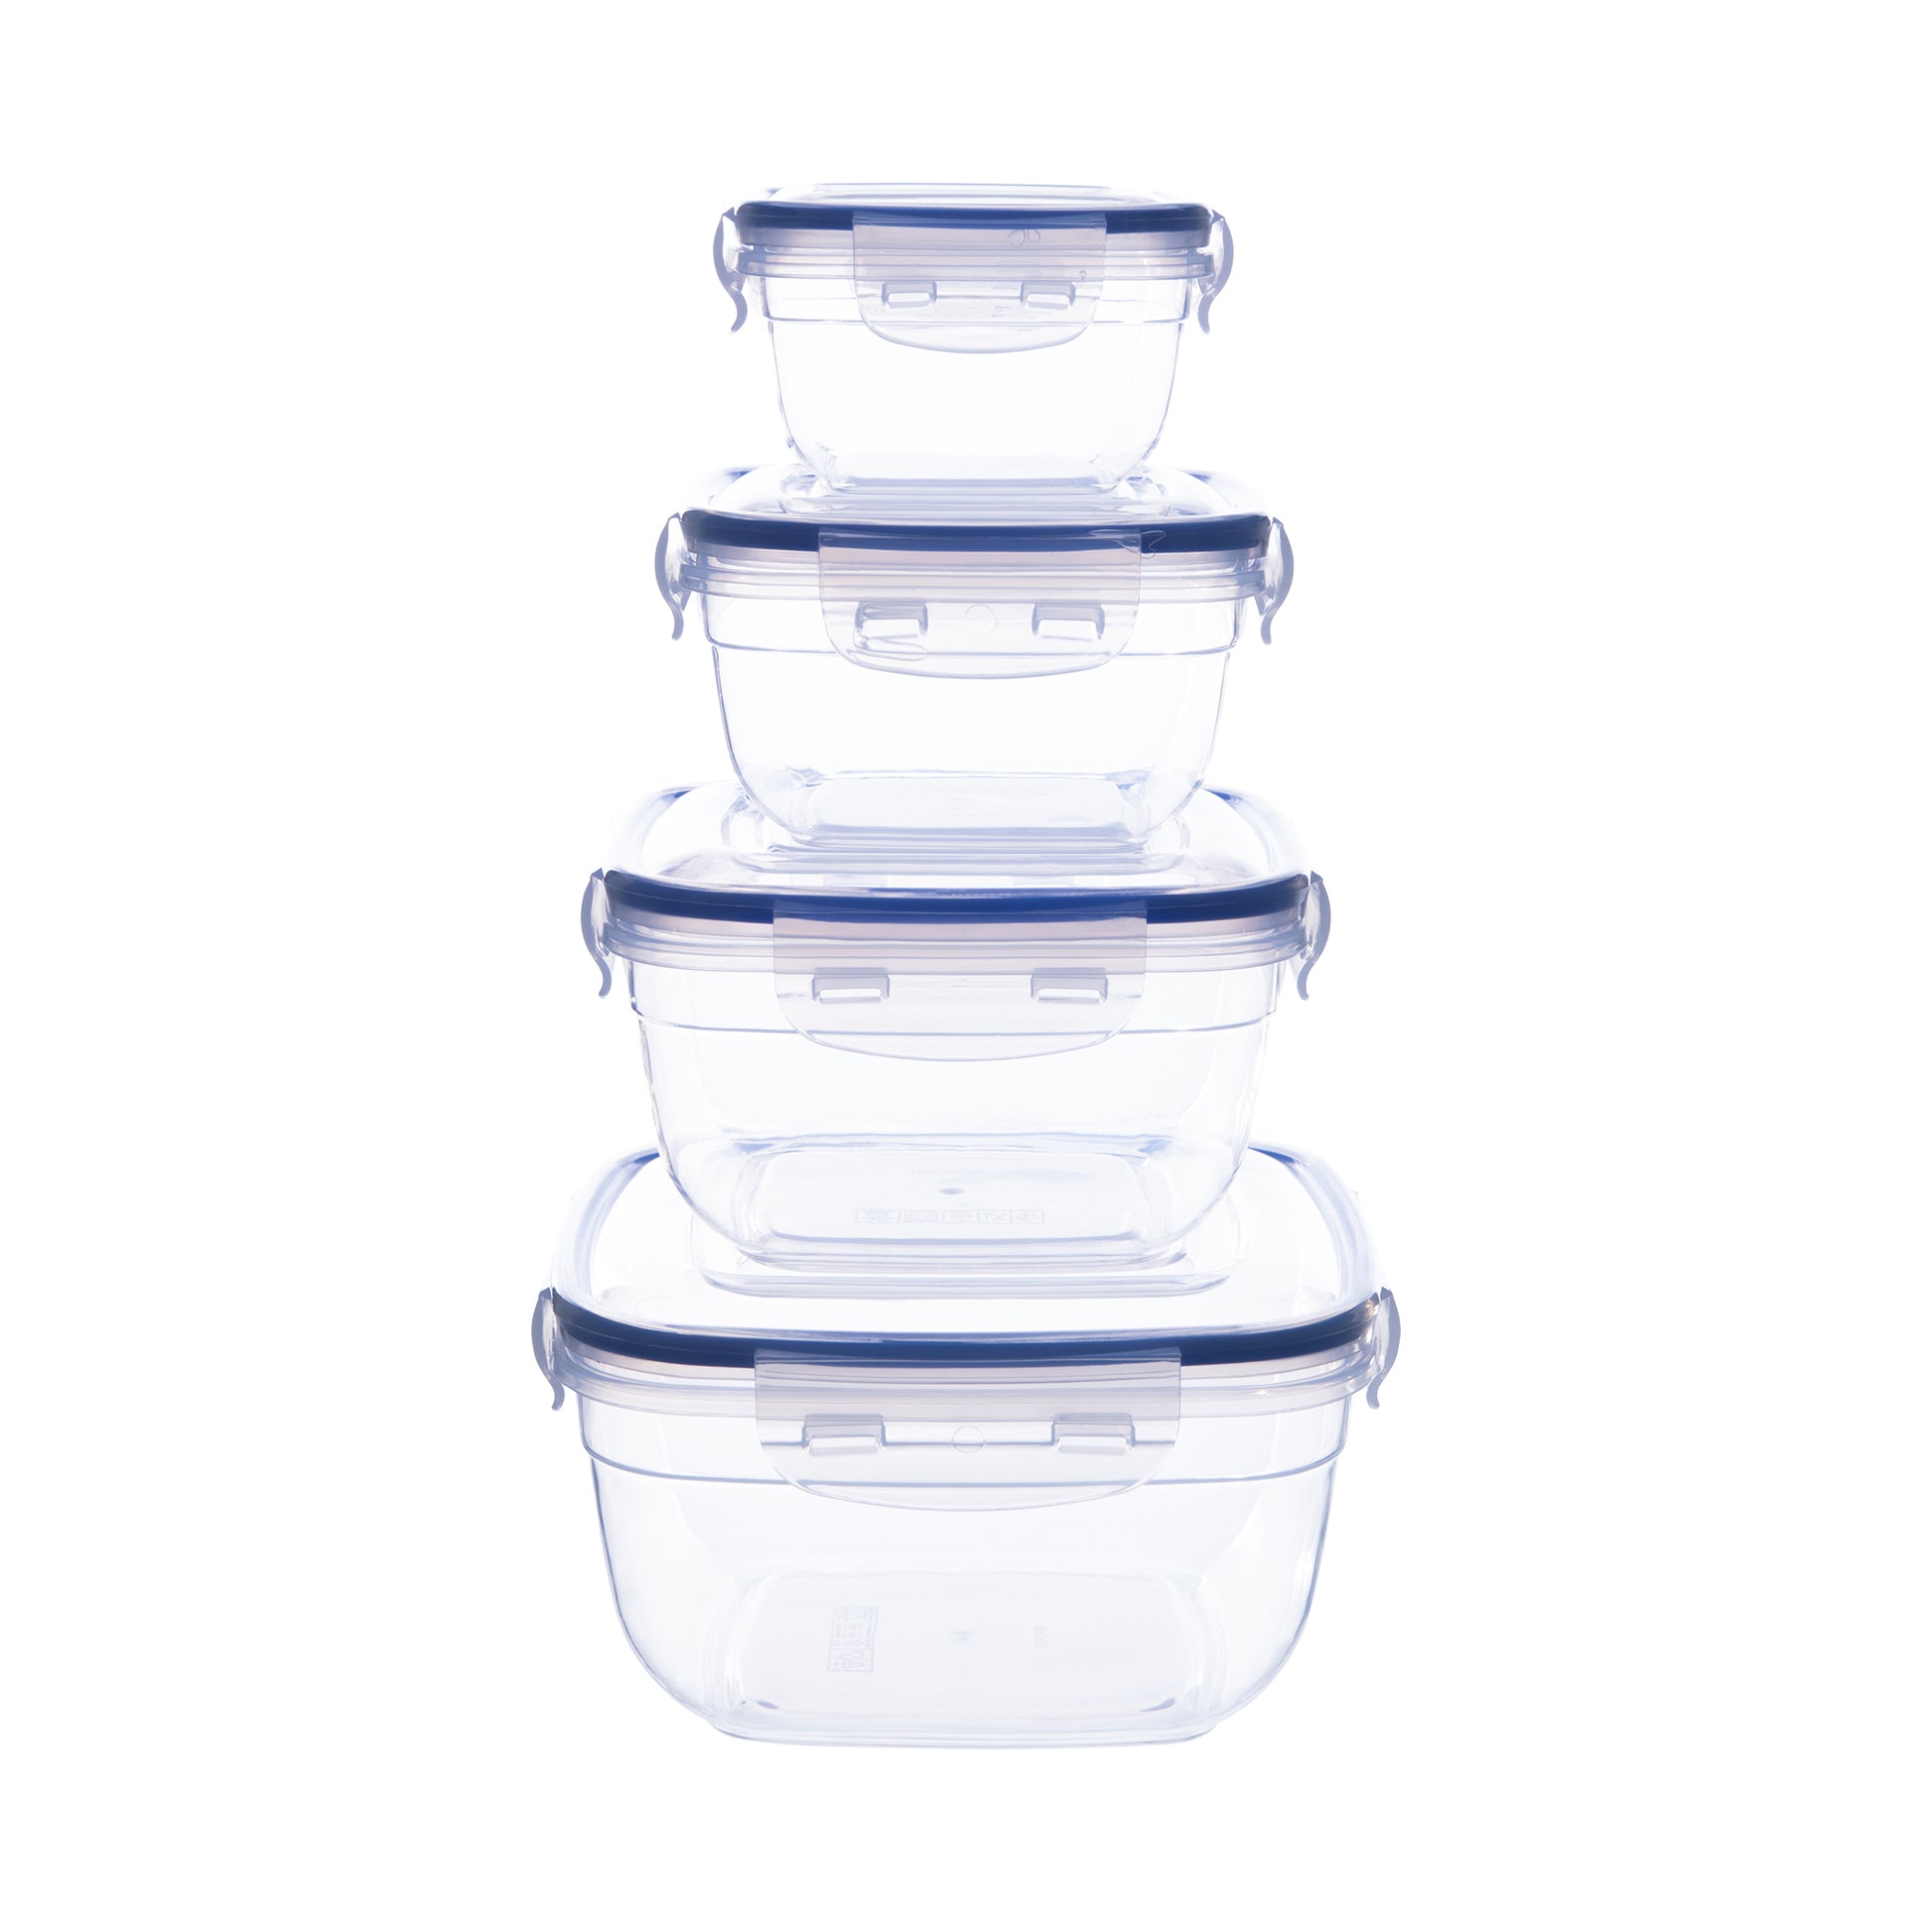 Superio Large Plastic Food Storage Container, with Airtight Lid